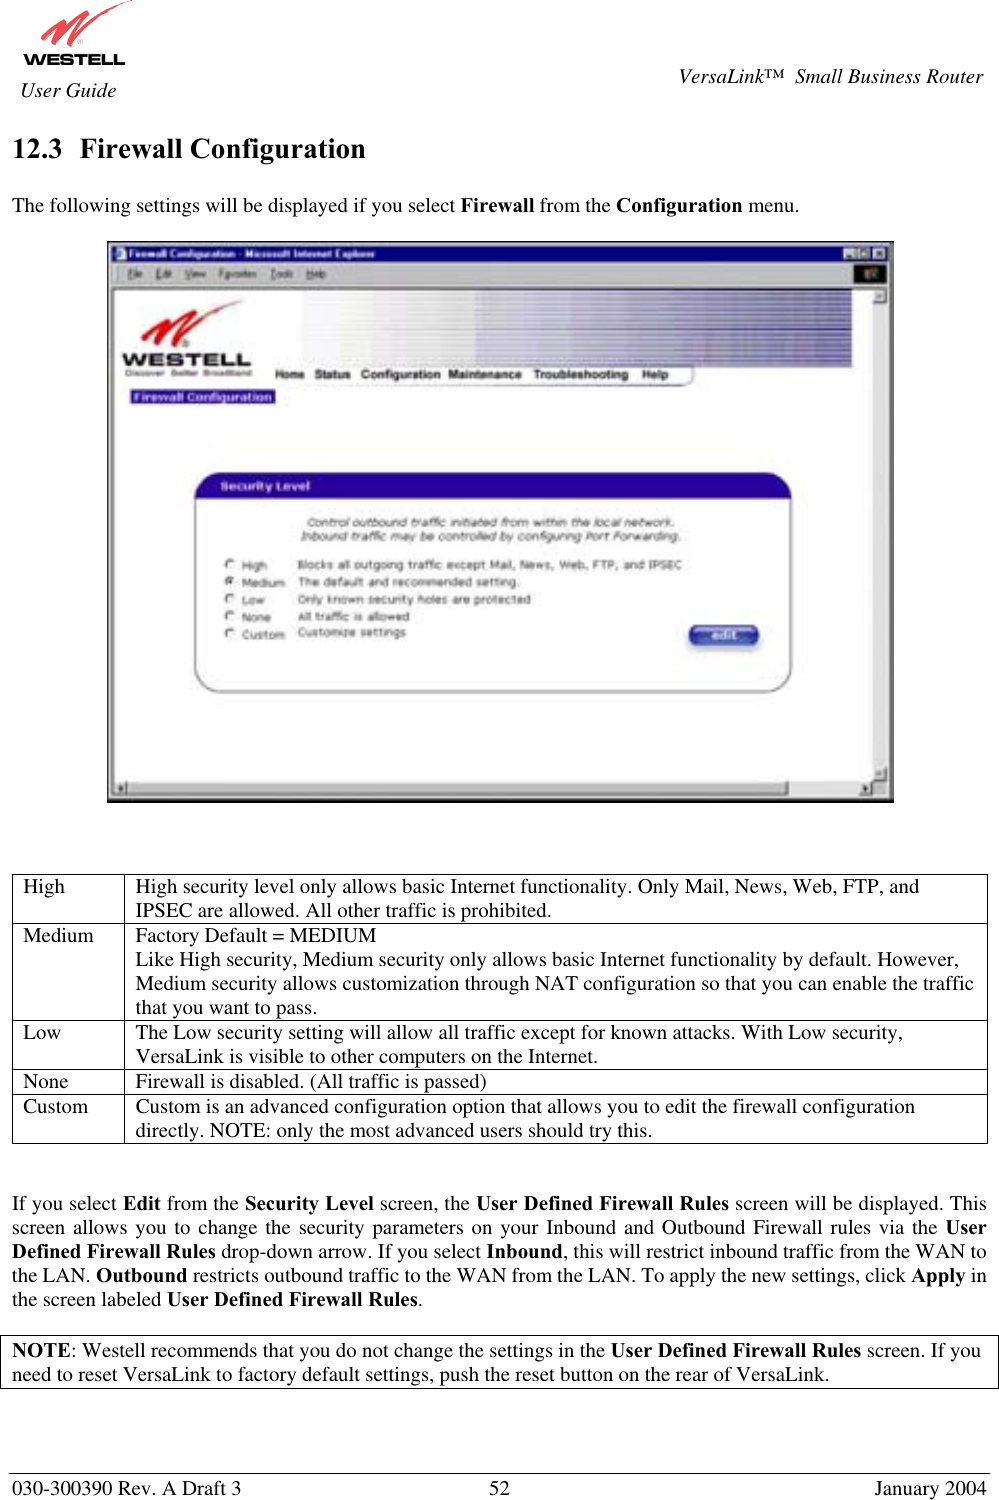       030-300390 Rev. A Draft 3  52  January 2004  VersaLink™  Small Business Router  User Guide 12.3  Firewall Configuration  The following settings will be displayed if you select Firewall from the Configuration menu.       High  High security level only allows basic Internet functionality. Only Mail, News, Web, FTP, and IPSEC are allowed. All other traffic is prohibited. Medium  Factory Default = MEDIUM Like High security, Medium security only allows basic Internet functionality by default. However, Medium security allows customization through NAT configuration so that you can enable the traffic that you want to pass. Low  The Low security setting will allow all traffic except for known attacks. With Low security, VersaLink is visible to other computers on the Internet. None  Firewall is disabled. (All traffic is passed)  Custom  Custom is an advanced configuration option that allows you to edit the firewall configuration directly. NOTE: only the most advanced users should try this.   If you select Edit from the Security Level screen, the User Defined Firewall Rules screen will be displayed. This screen allows you to change the security parameters on your Inbound and Outbound Firewall rules via the User Defined Firewall Rules drop-down arrow. If you select Inbound, this will restrict inbound traffic from the WAN to the LAN. Outbound restricts outbound traffic to the WAN from the LAN. To apply the new settings, click Apply in the screen labeled User Defined Firewall Rules.  NOTE: Westell recommends that you do not change the settings in the User Defined Firewall Rules screen. If you need to reset VersaLink to factory default settings, push the reset button on the rear of VersaLink.  